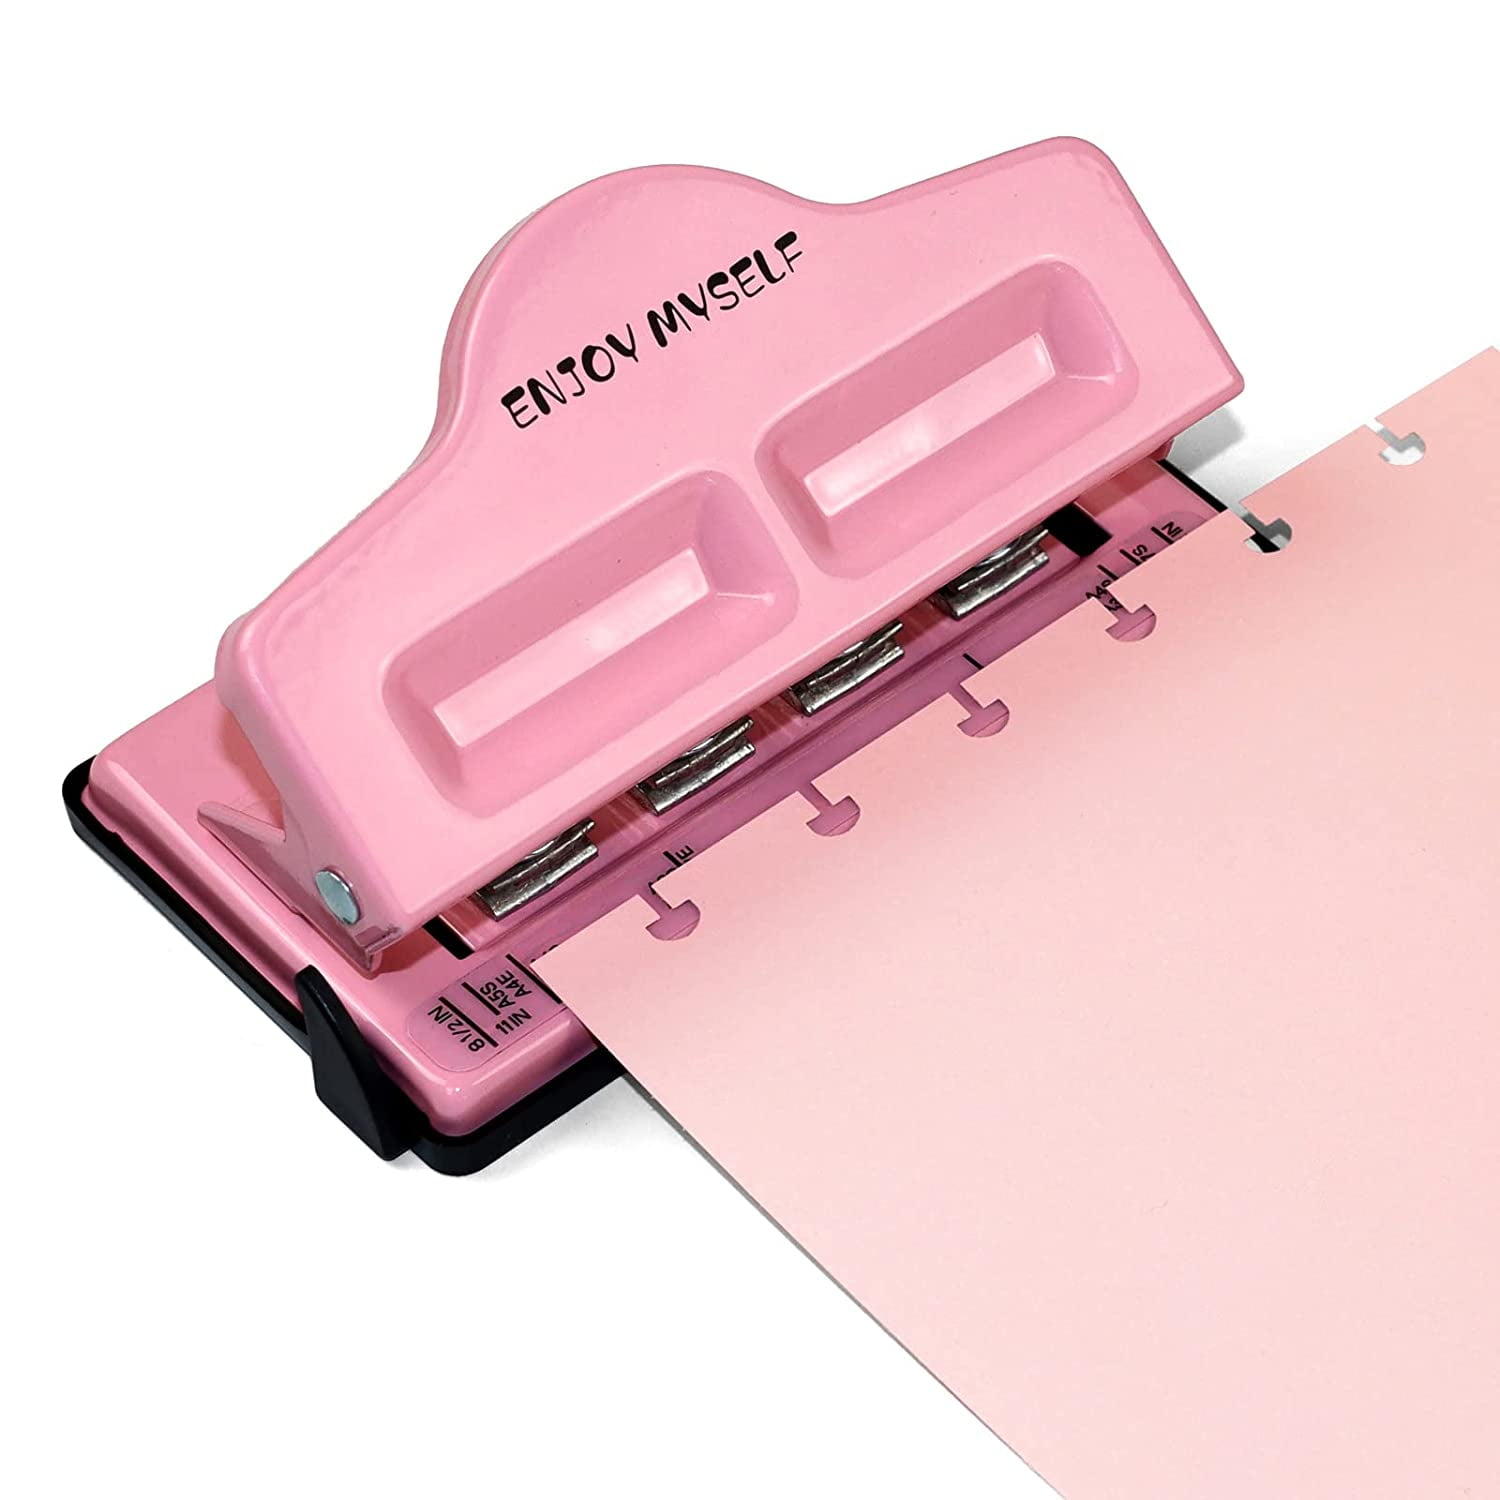 The Happy Planner Big Paper Punch Puncher Pink 11 Hole Punch